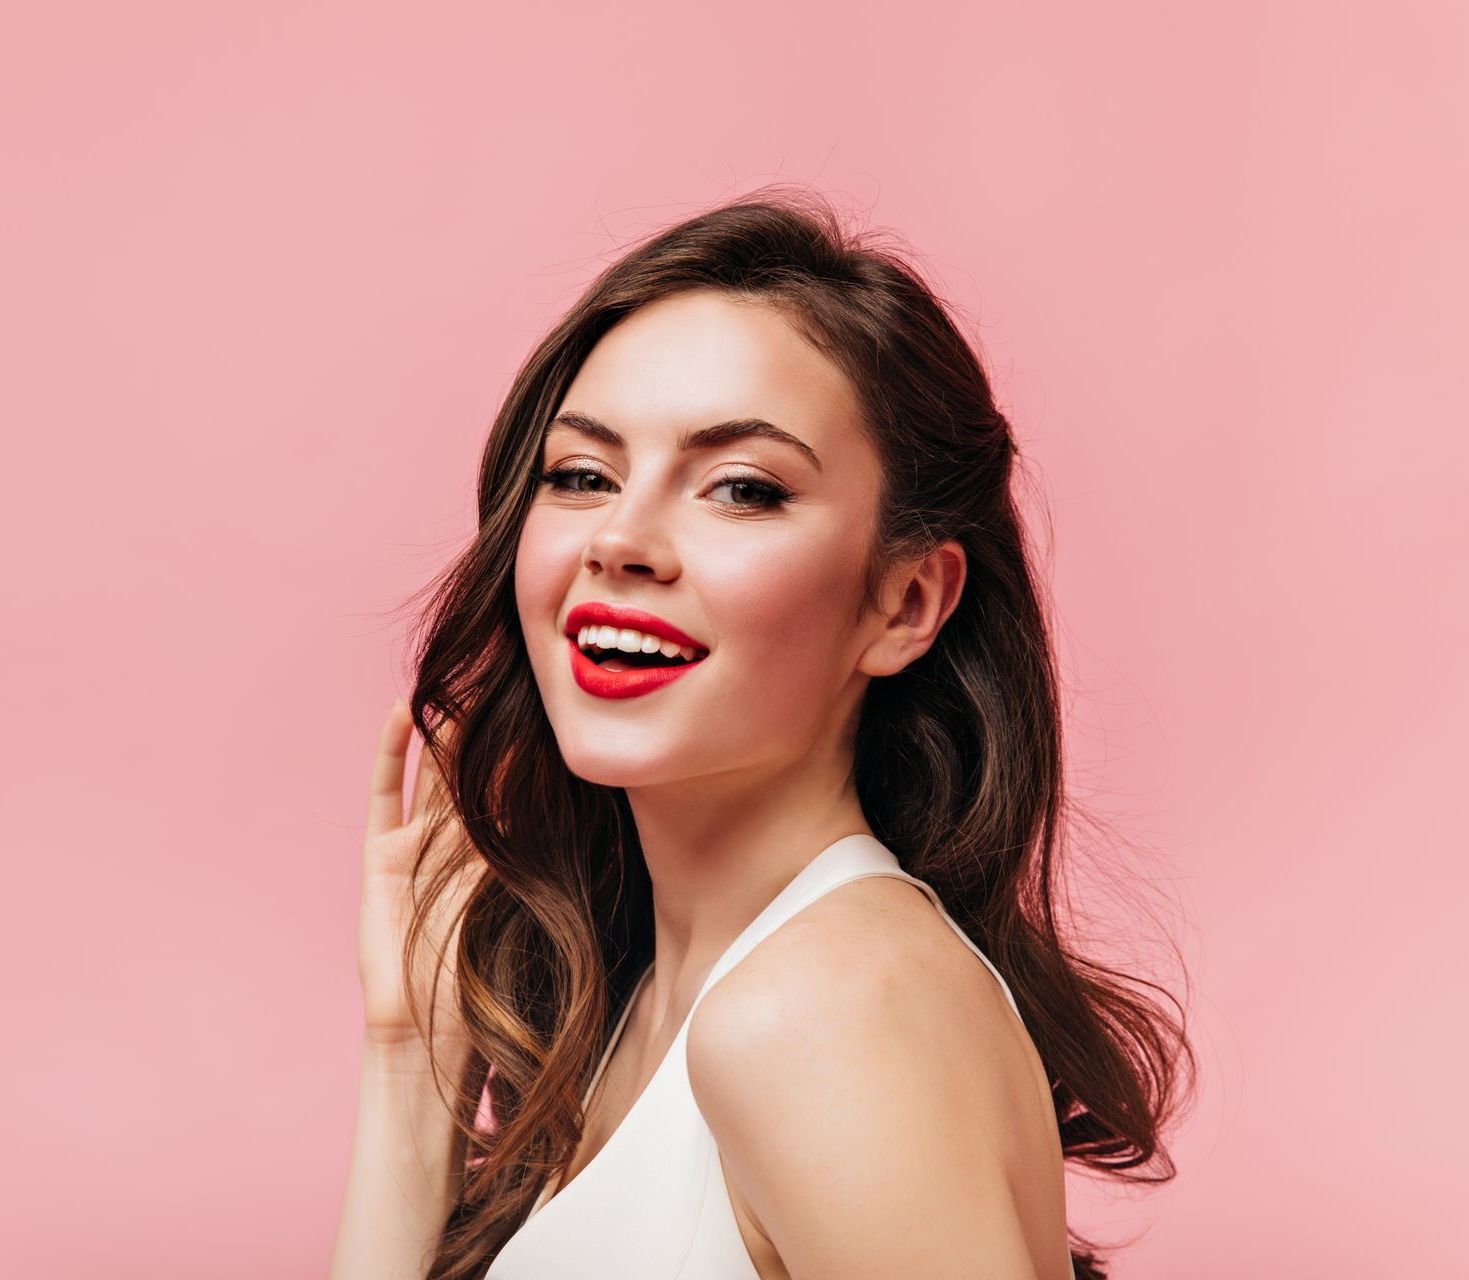 a woman with red lipstick on her lips is smiling